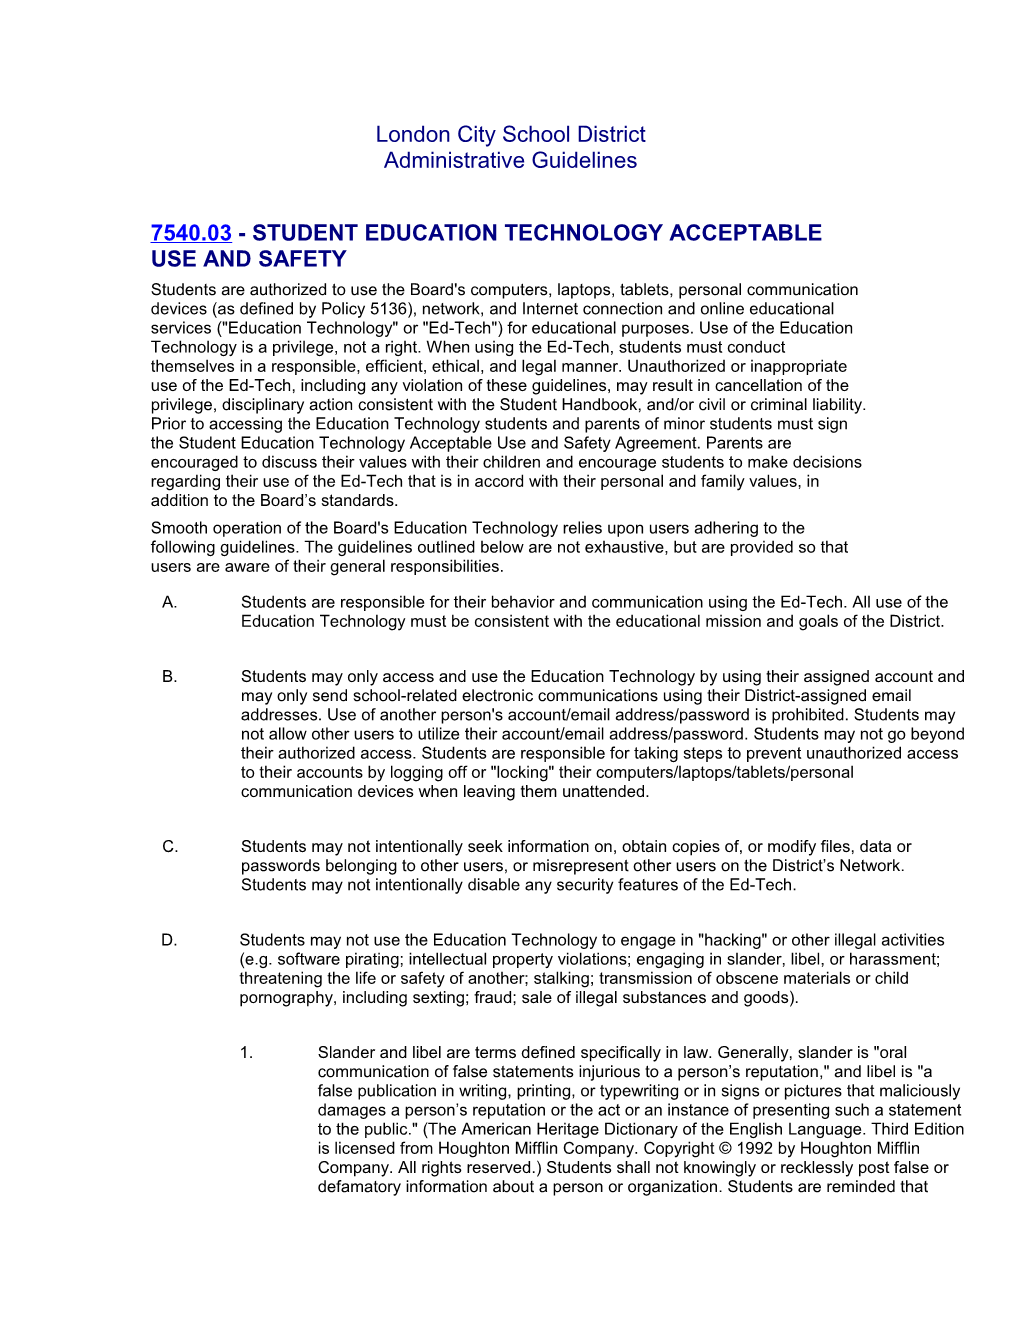 7540.03 - Student Education Technology Acceptable Use and Safety